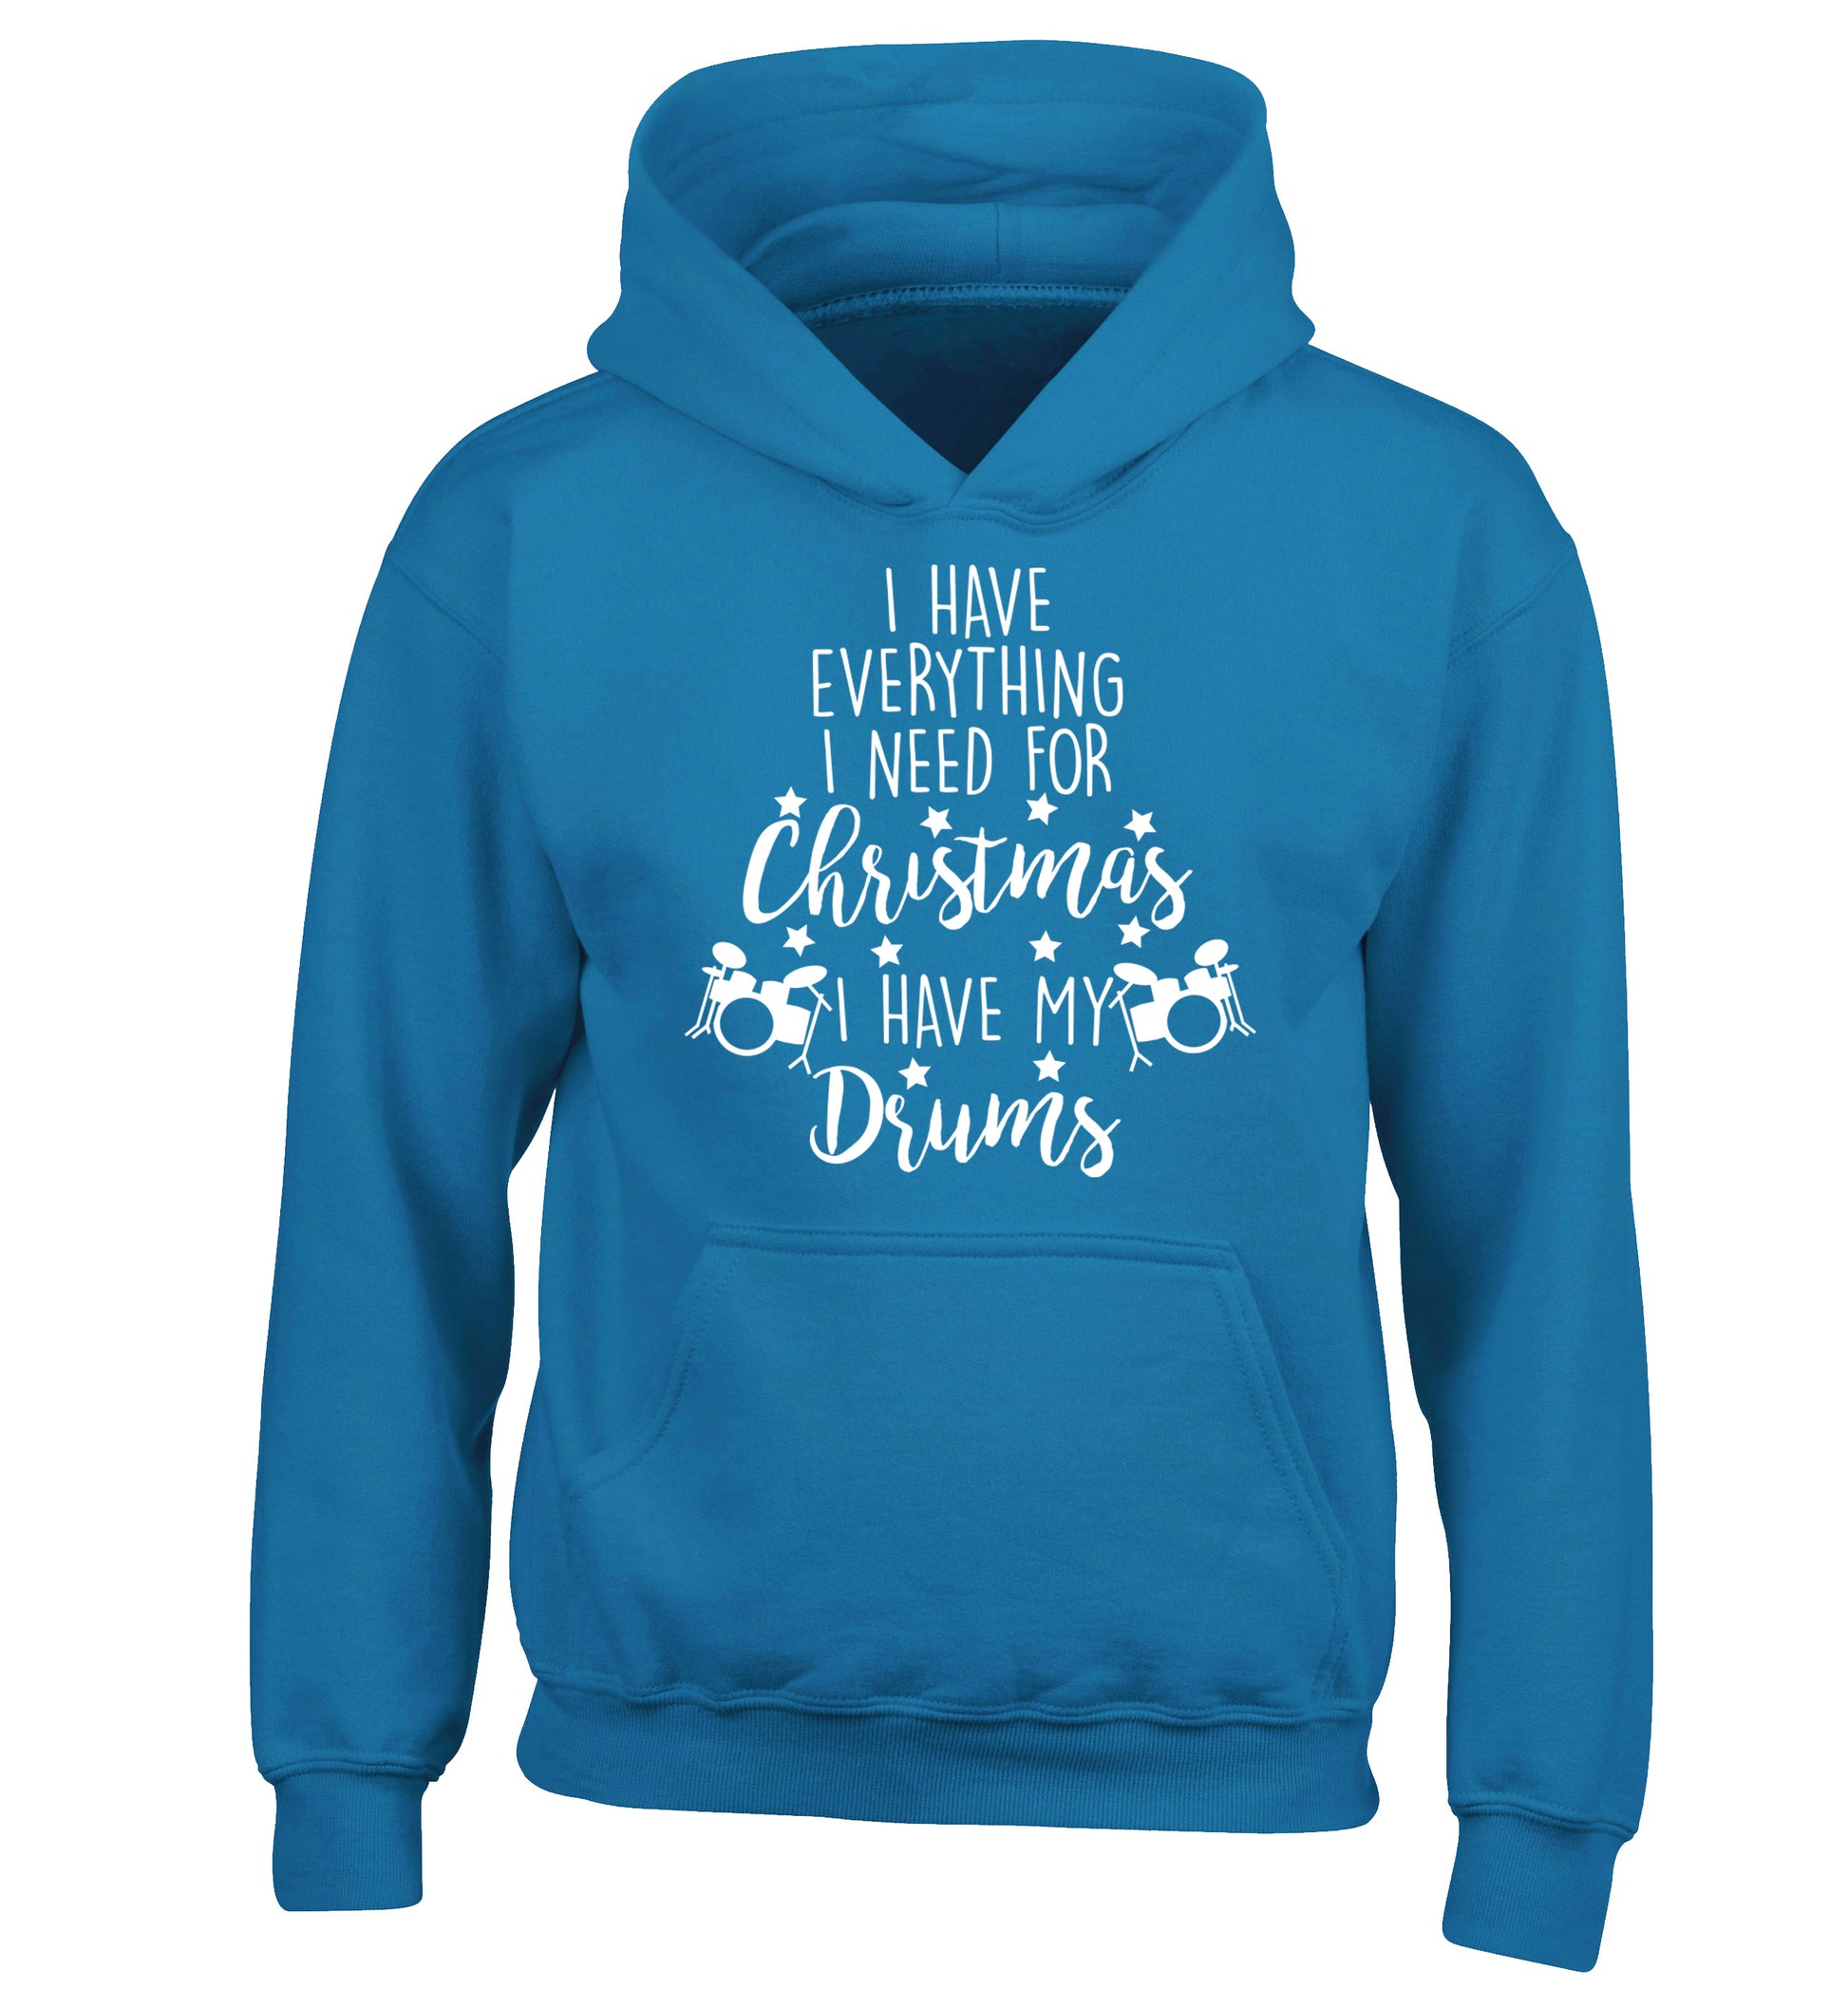 I have everything I need for Christmas I have my drums! children's blue hoodie 12-14 Years